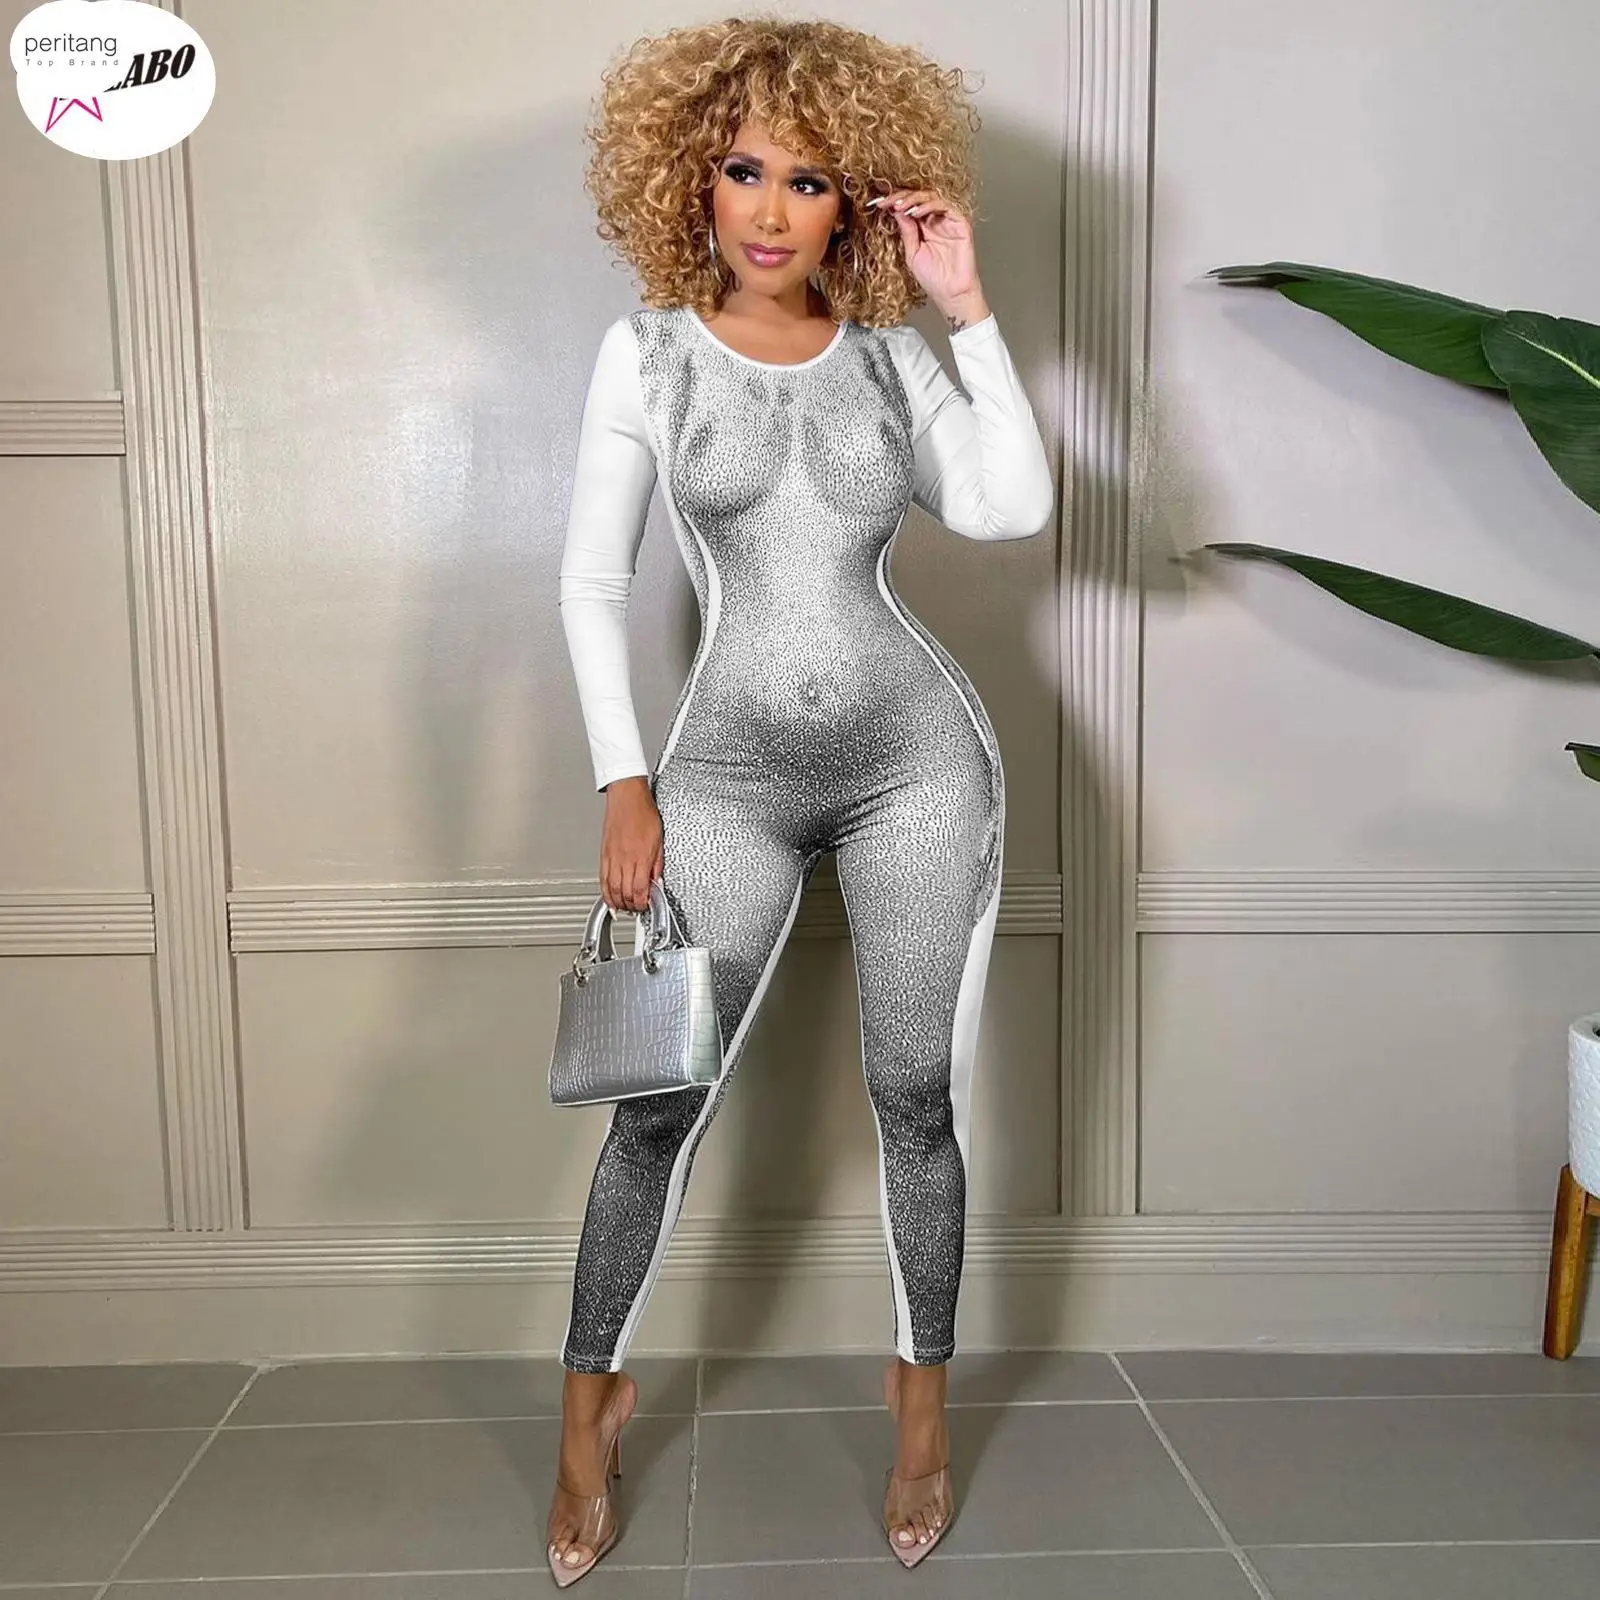 

Fashion 3D Body Print Design Rompers Women Sexy Sporty O Neck Long Sleeve Leggings Skinny Club Party Jumpsuit Overalls Clothes